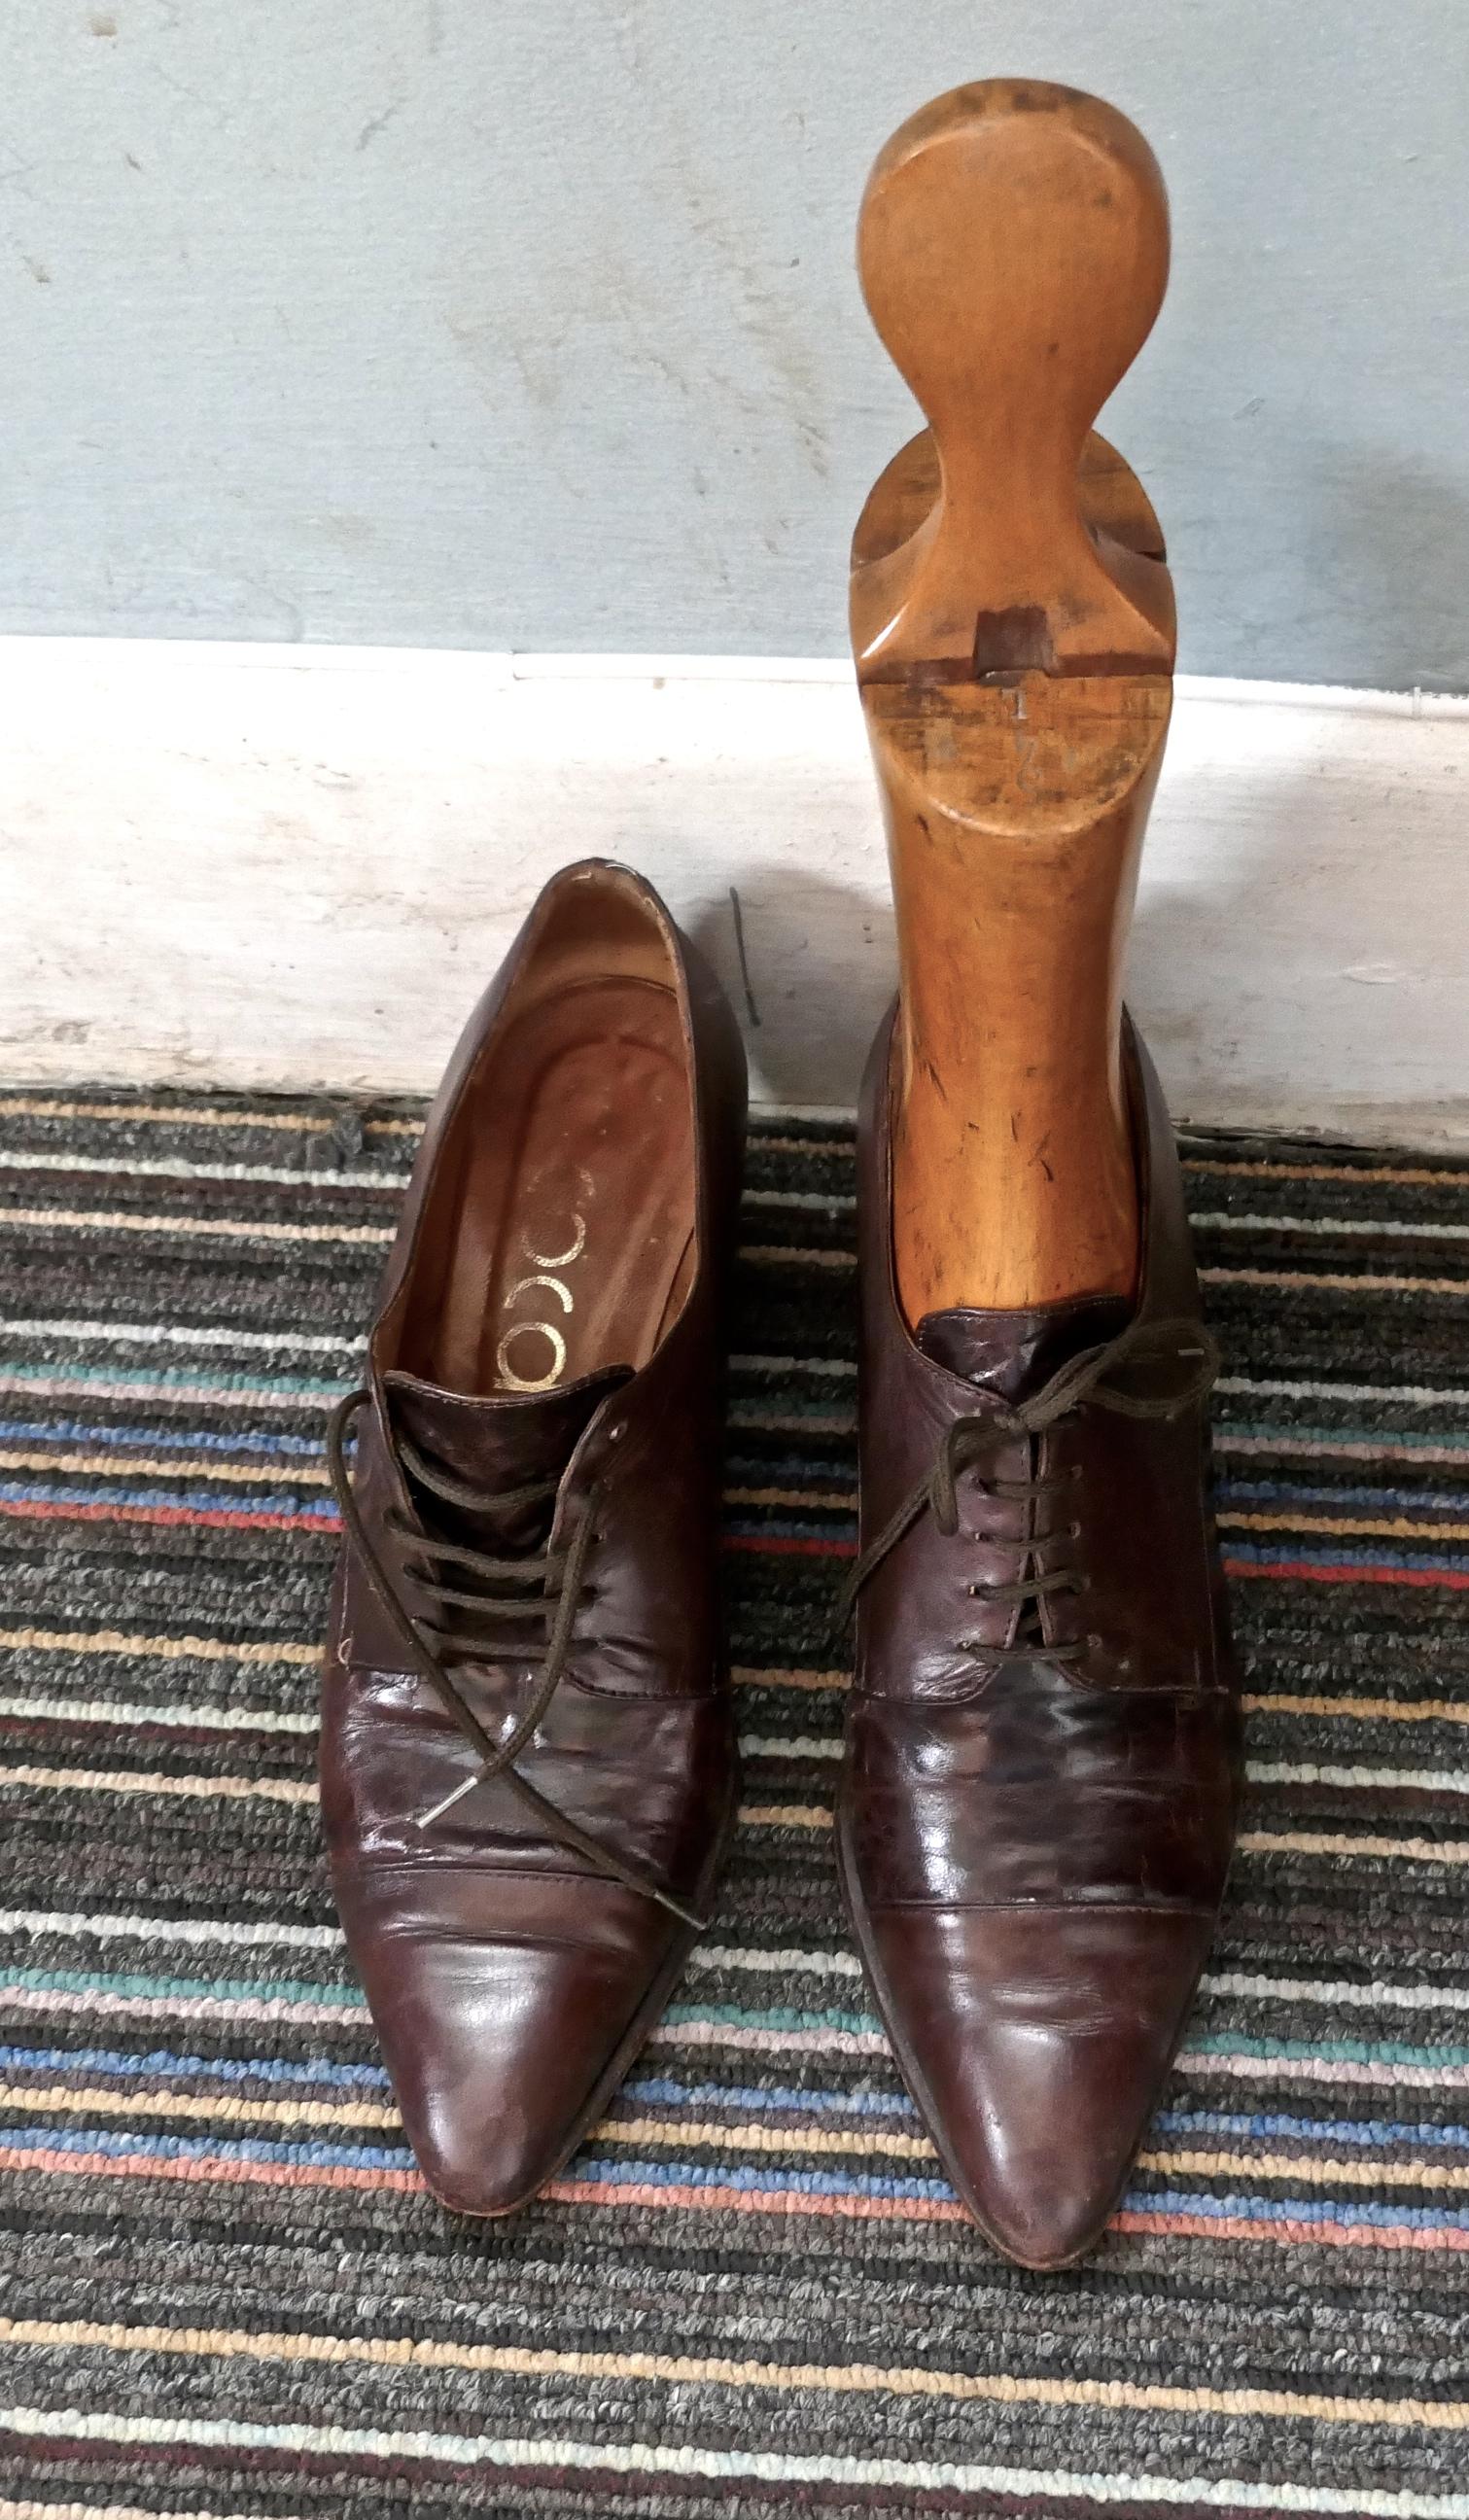 Attractive 19th century French ladies ankle boot wooden stretchers.

A great looking pair, made in golden beech, the stretchers come into three and are easy to use, I have shown them in a 38.5 narrow Italian designer shoe
The stretchers are in